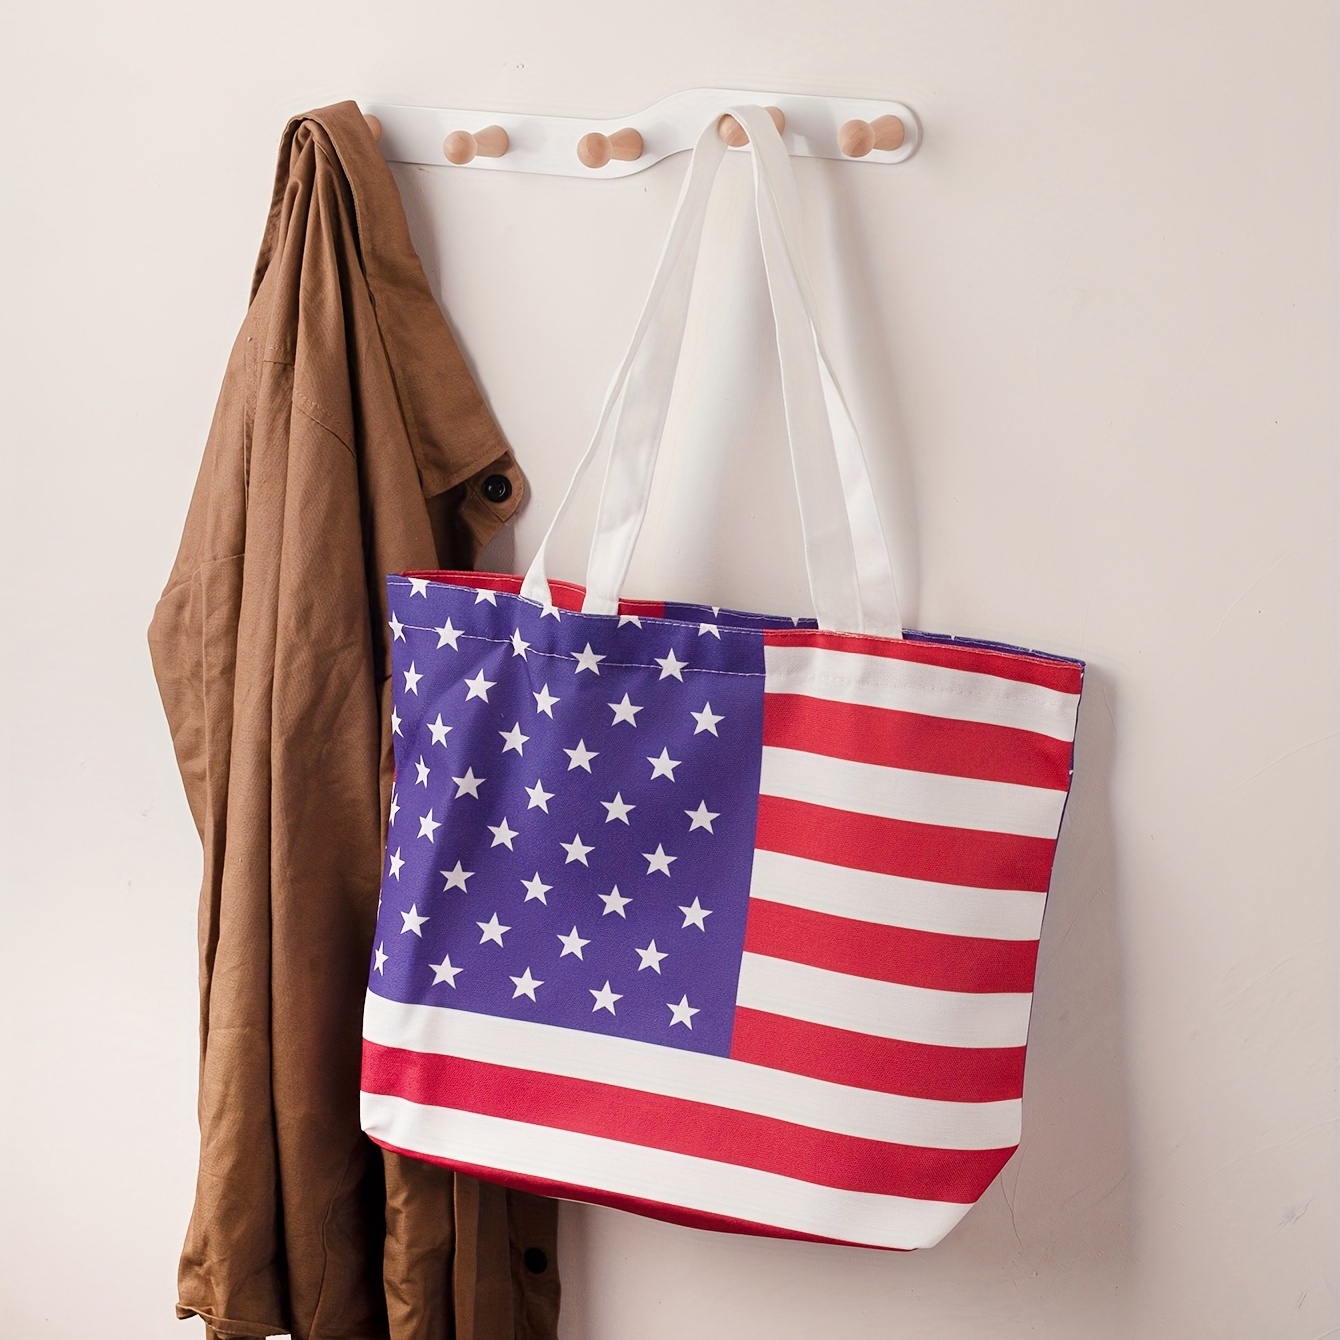  France Flag Canvas Shopping Tote Bag for Women Aesthetic Beach  Bag Shoulder Bag Reusable Grocery Bags : Sports & Outdoors